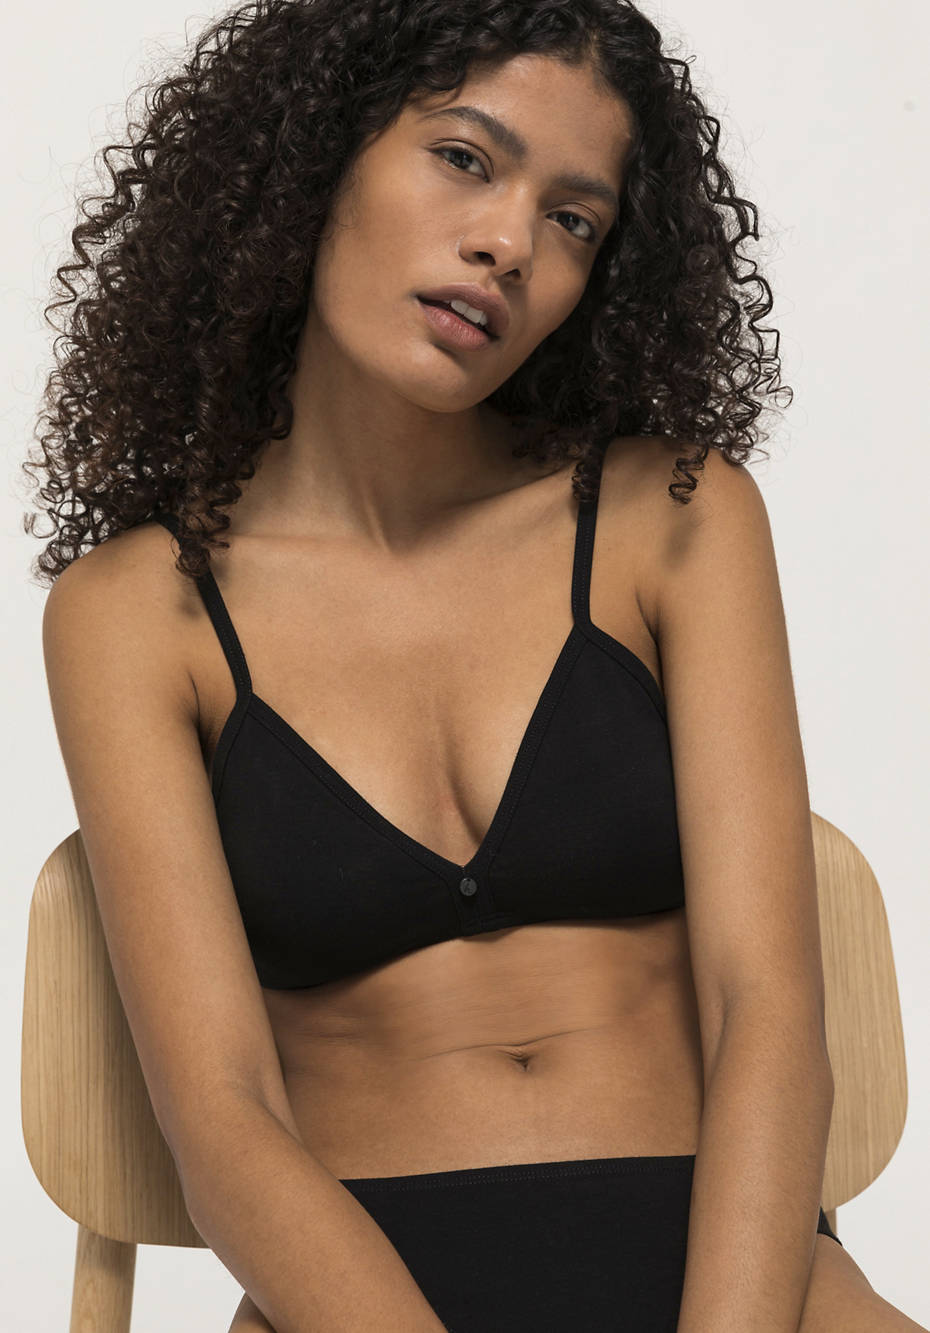 Triangle bra without underwire COTTON FEEL made of organic cotton 4983989